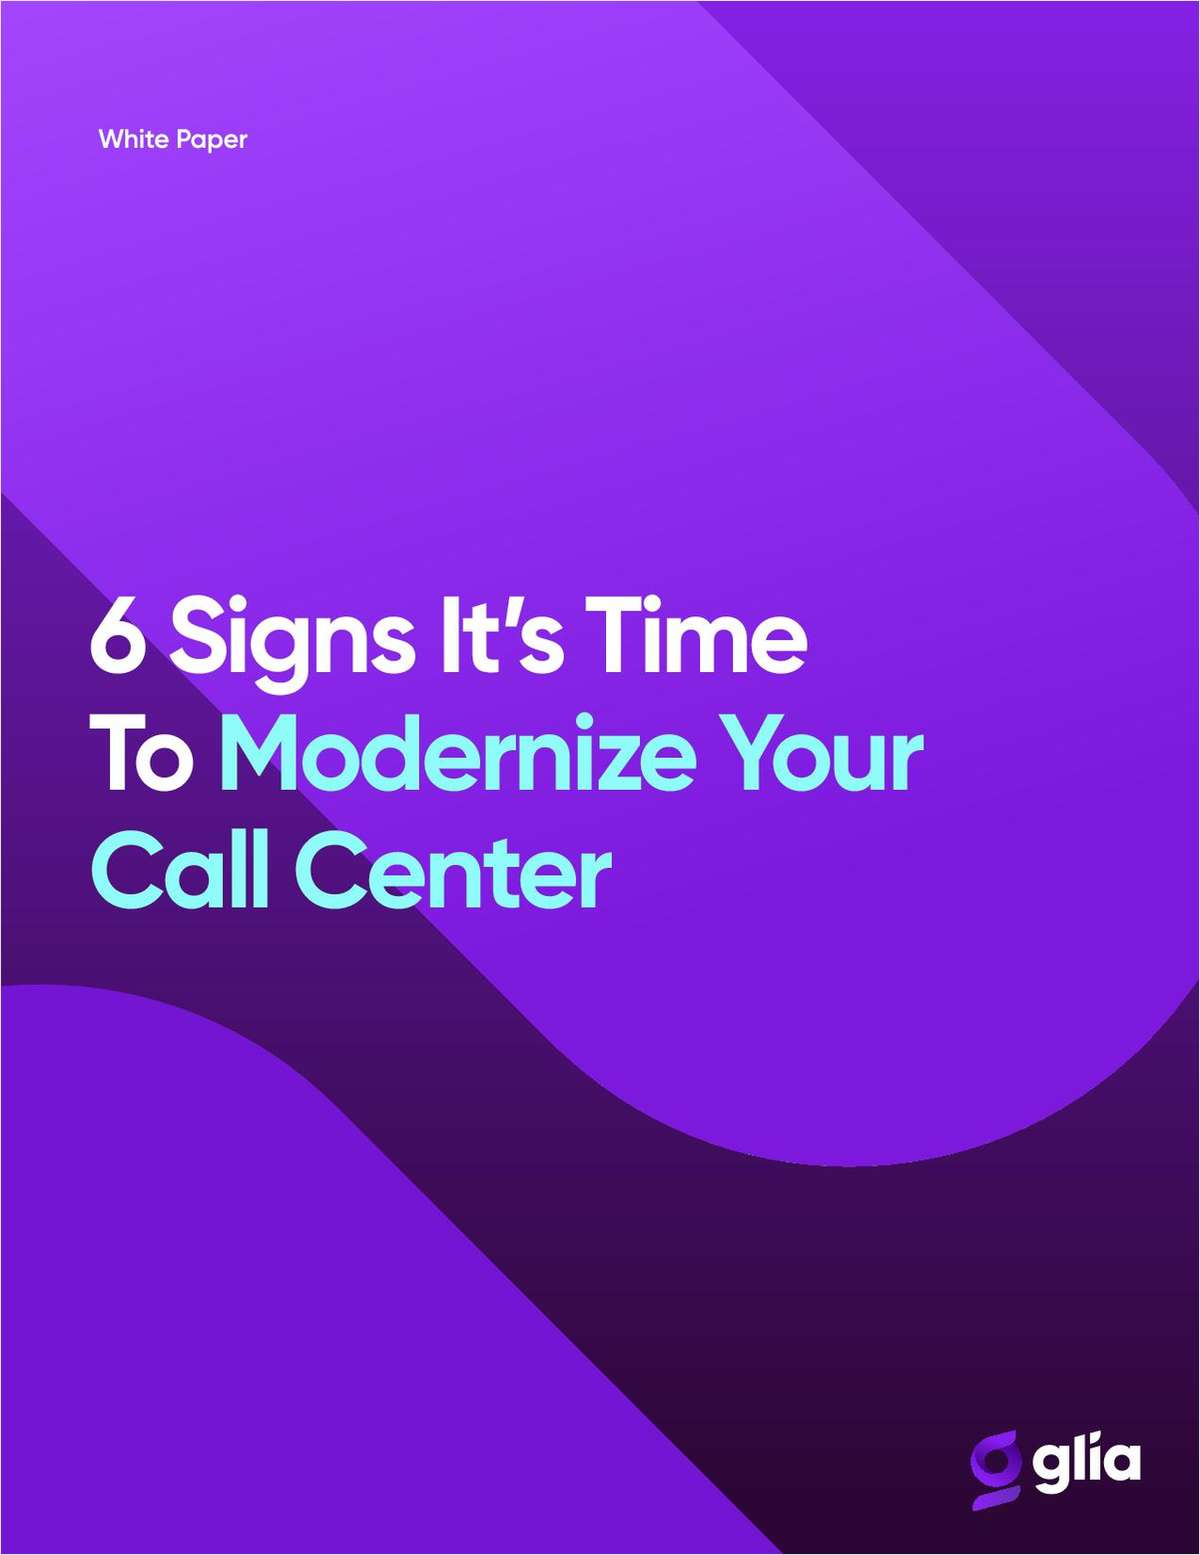 6 Signs It's Time To Modernize Your Call Center